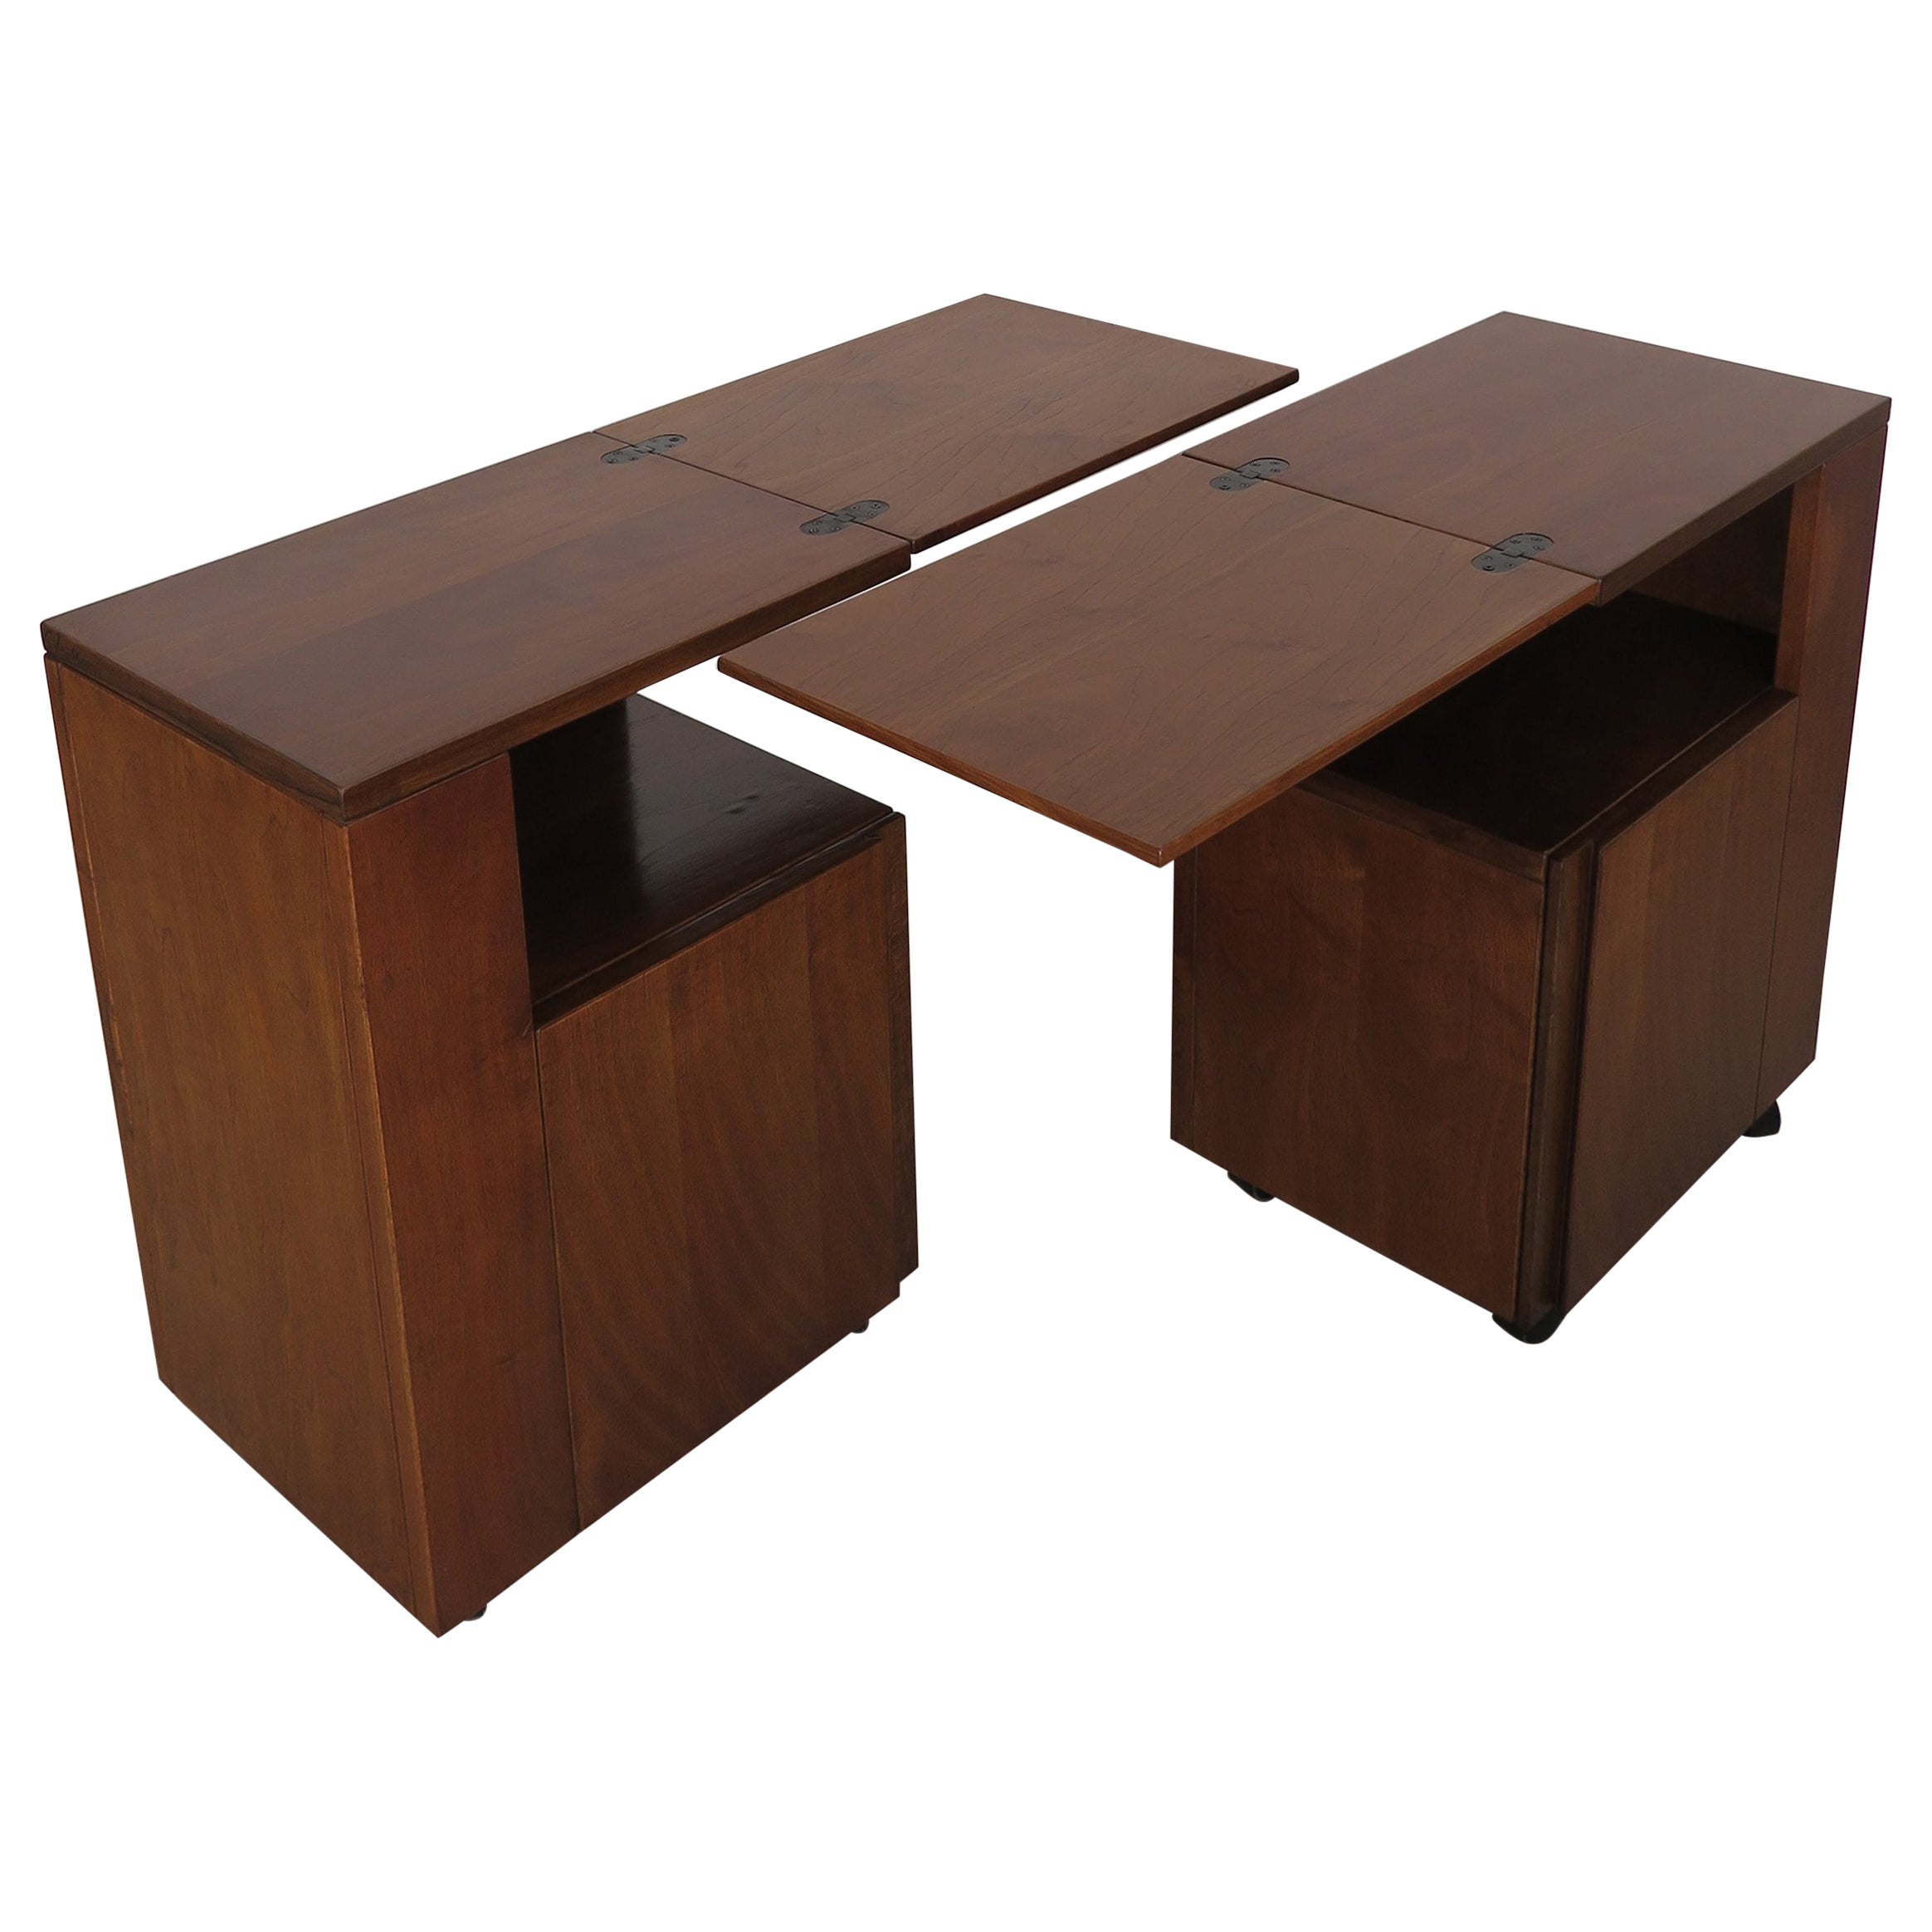 Giovanni Michelucci Poltronova Italian Wood Bedside Tables Nithg Stands 1960s For Sale